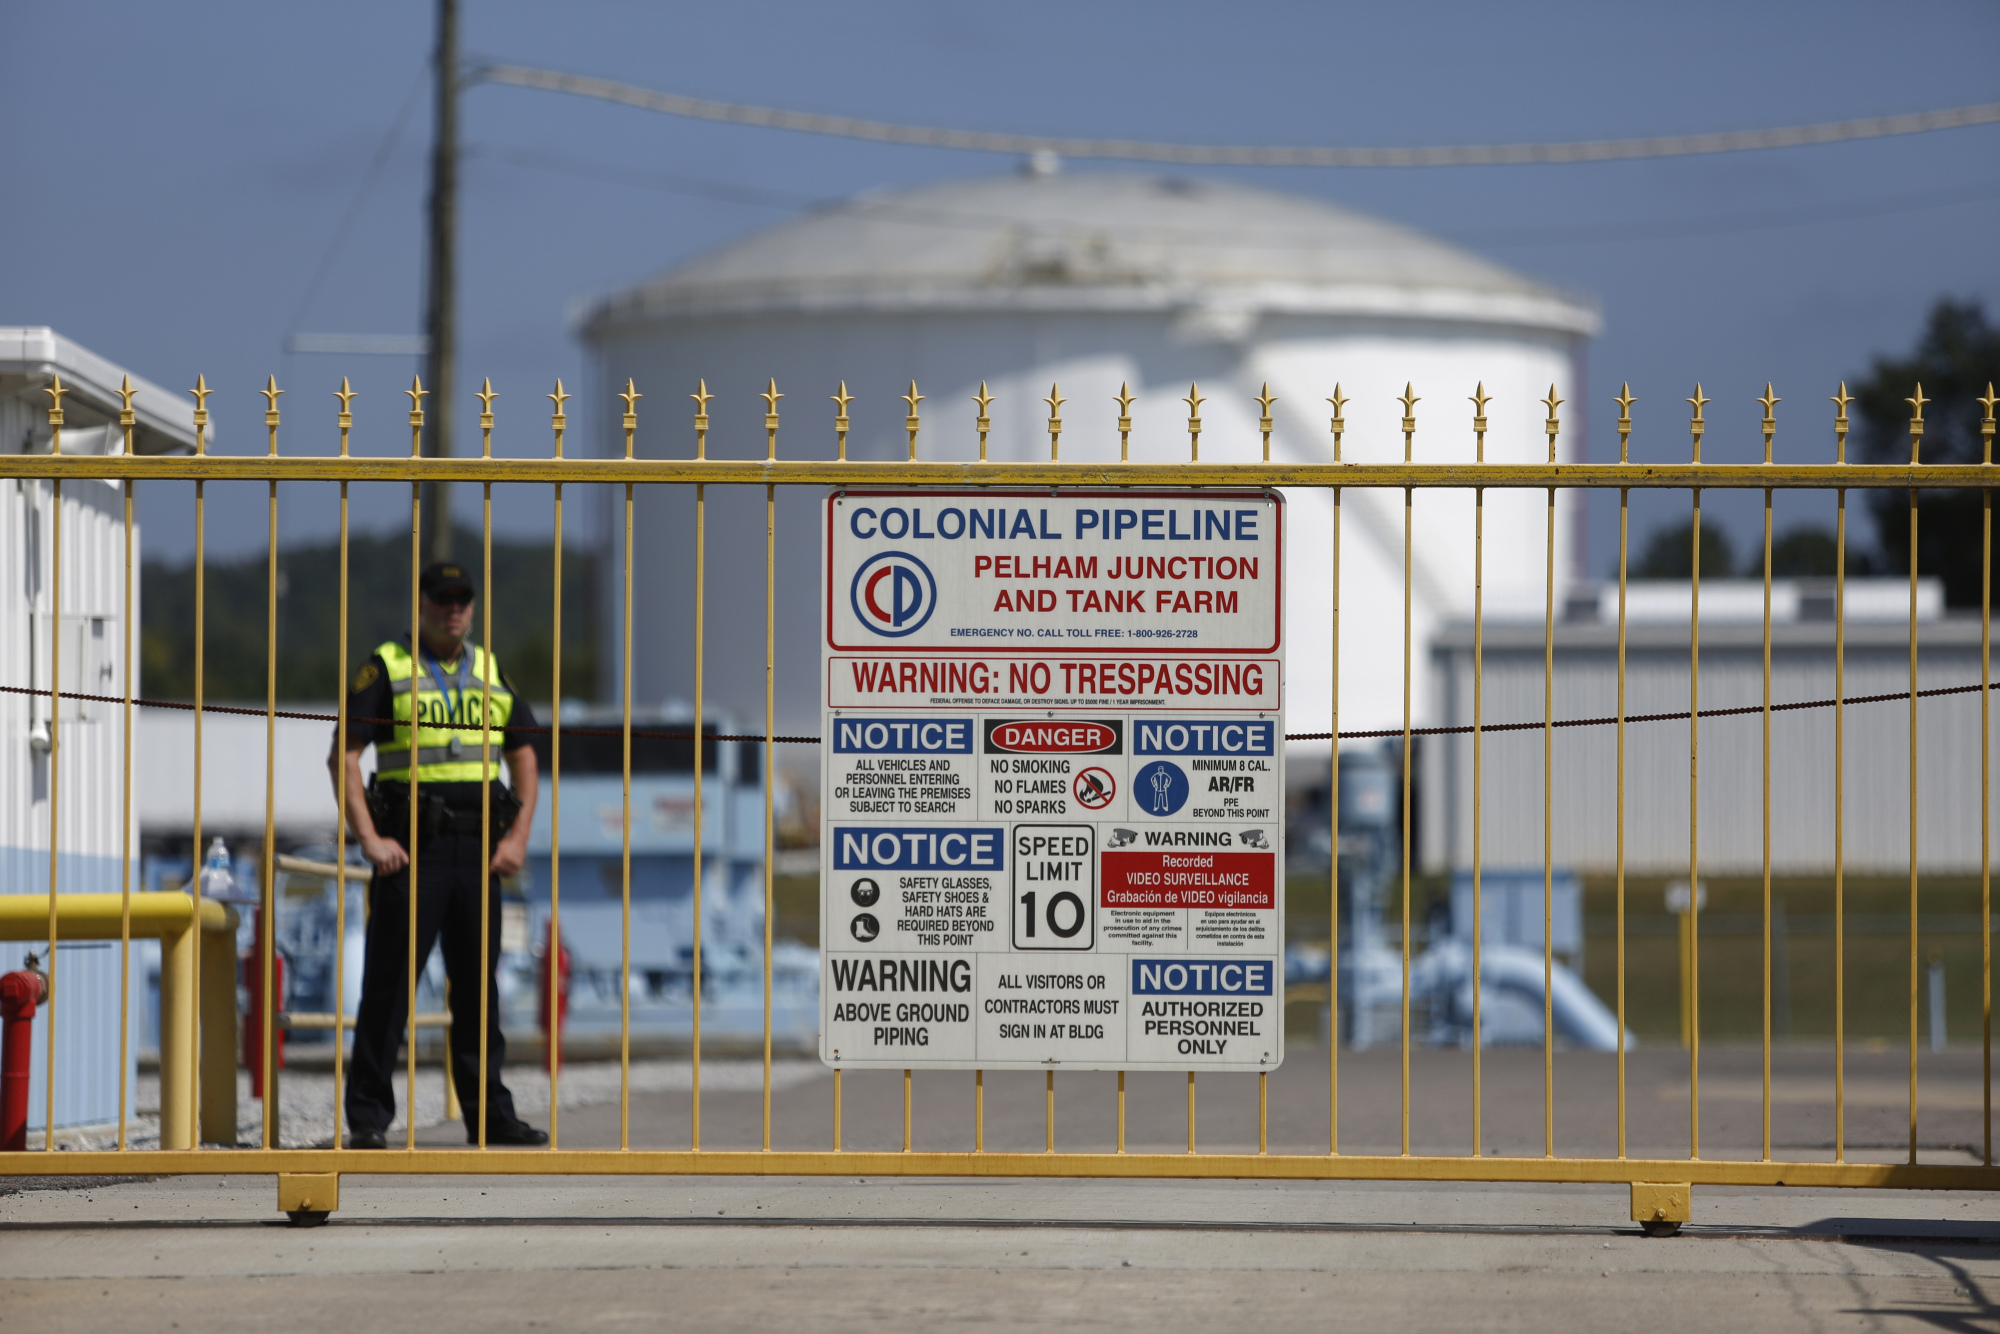 A police officer stands guard inside the gate to the Colonial Pipeline Co. Pelham junction and tank farm in Pelham, Alabama.